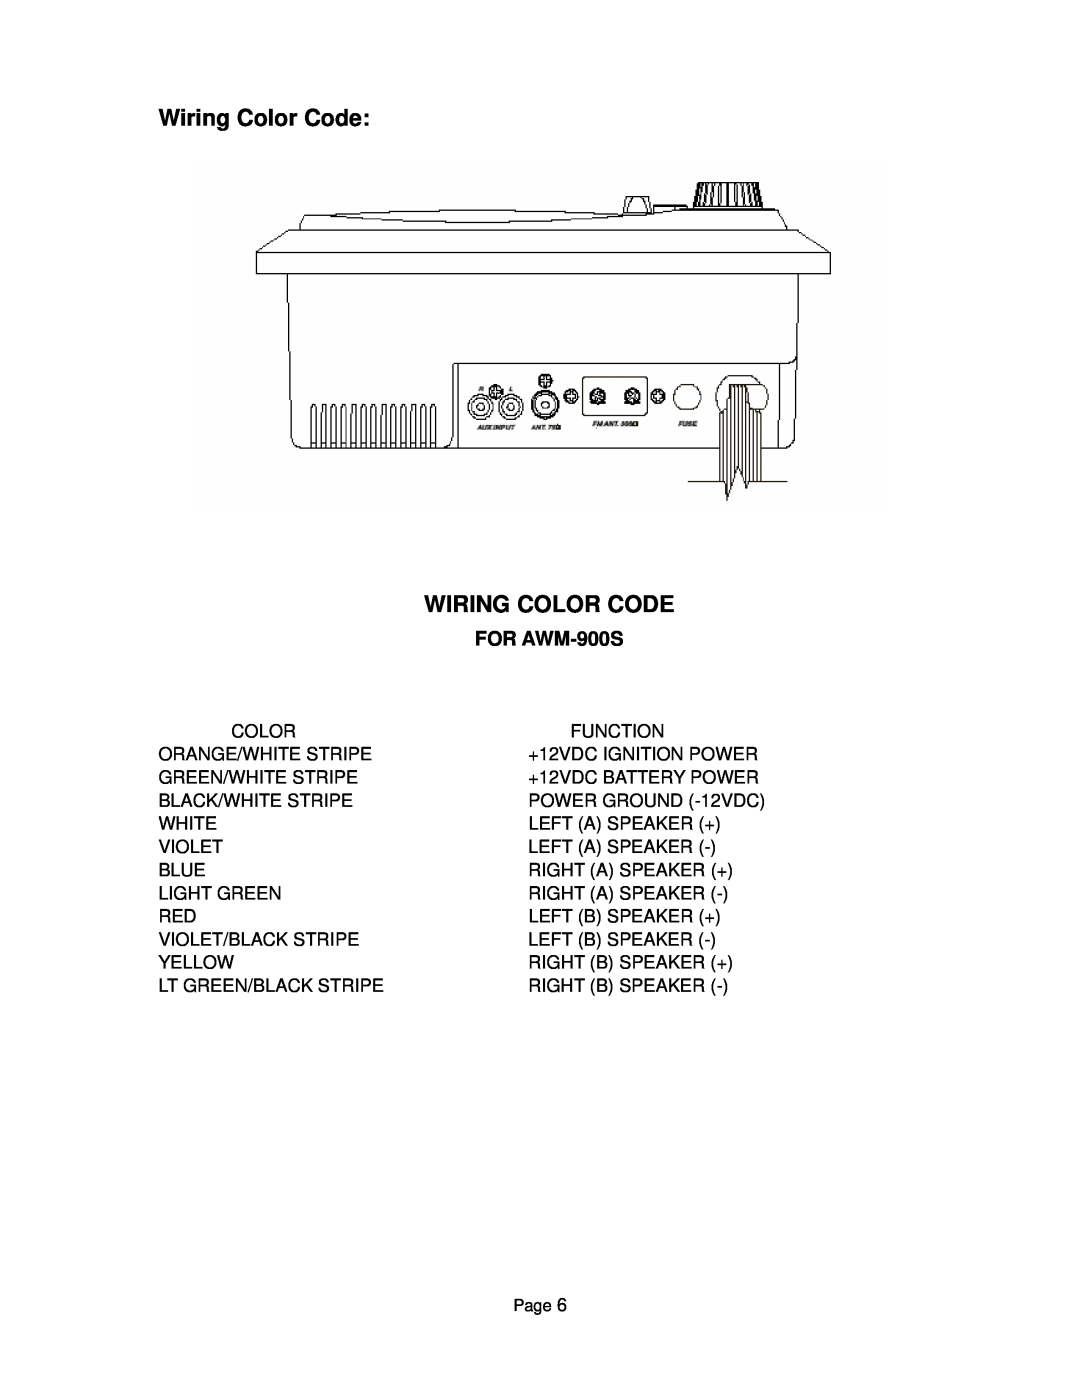 ASA Electronics AWM900S owner manual Wiring Color Code WIRING COLOR CODE, FOR AWM-900S 